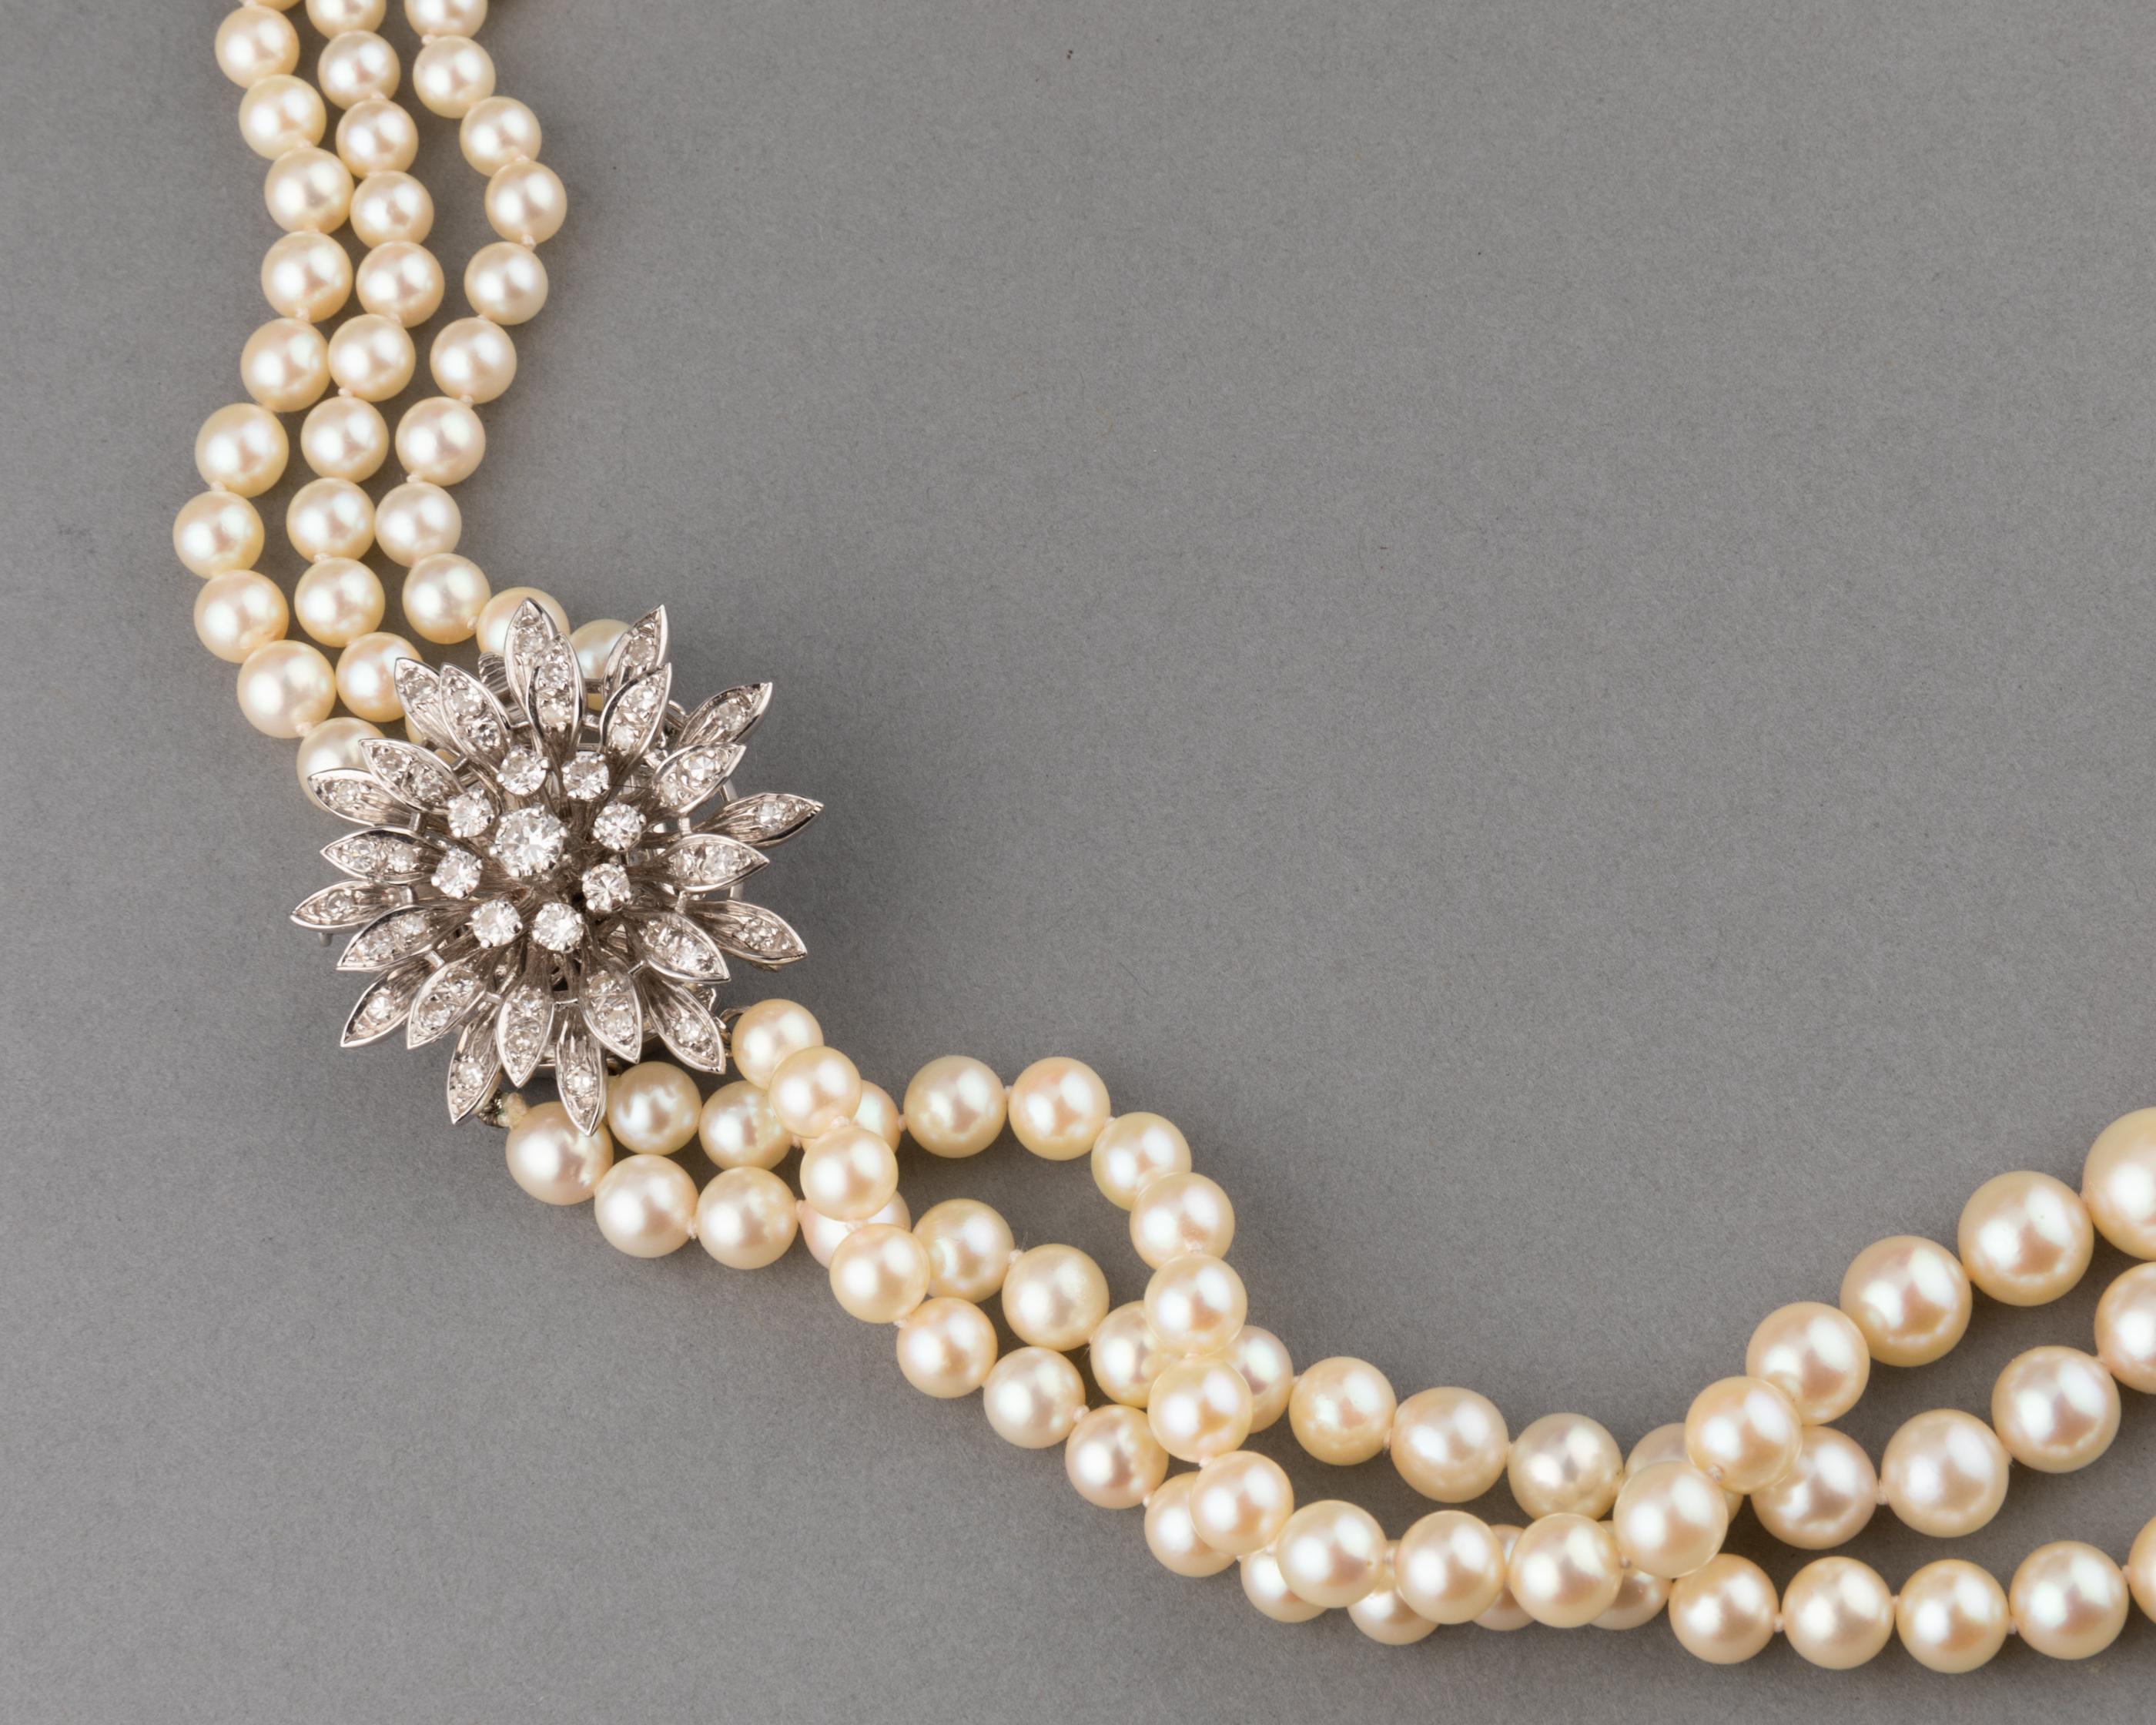 Very lovely vintage necklace, made in France circa 1960.

Made in white gold 18k, cultural sea pearls and 1.80 carats of diamonds. The pearls are in very good condition. Diameter of pearls are from 5 to 8 mm.
Mark for gold 18K: the eagle head. Mark